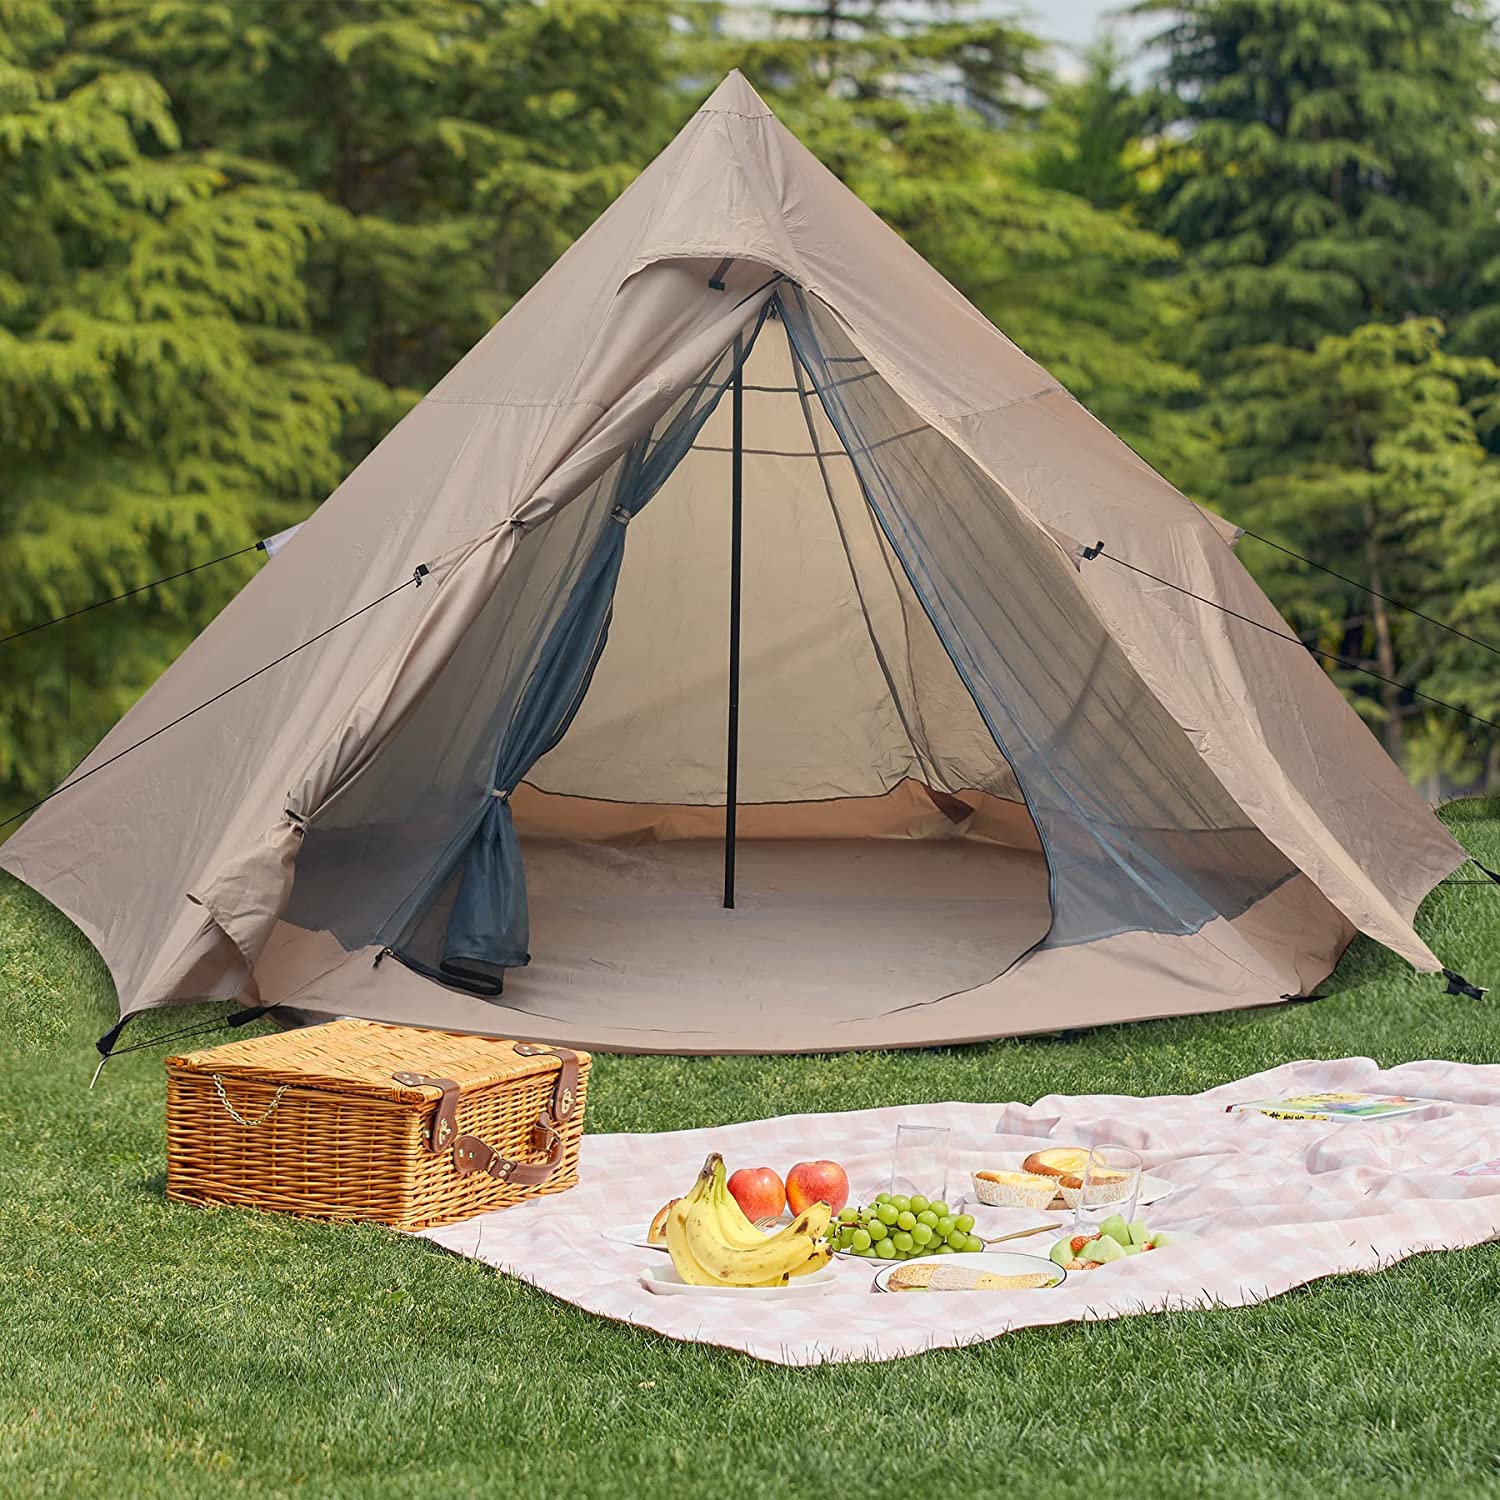 REDCAMP 4 person Canvas Camping Tent with Carrying Bag | Wayfair